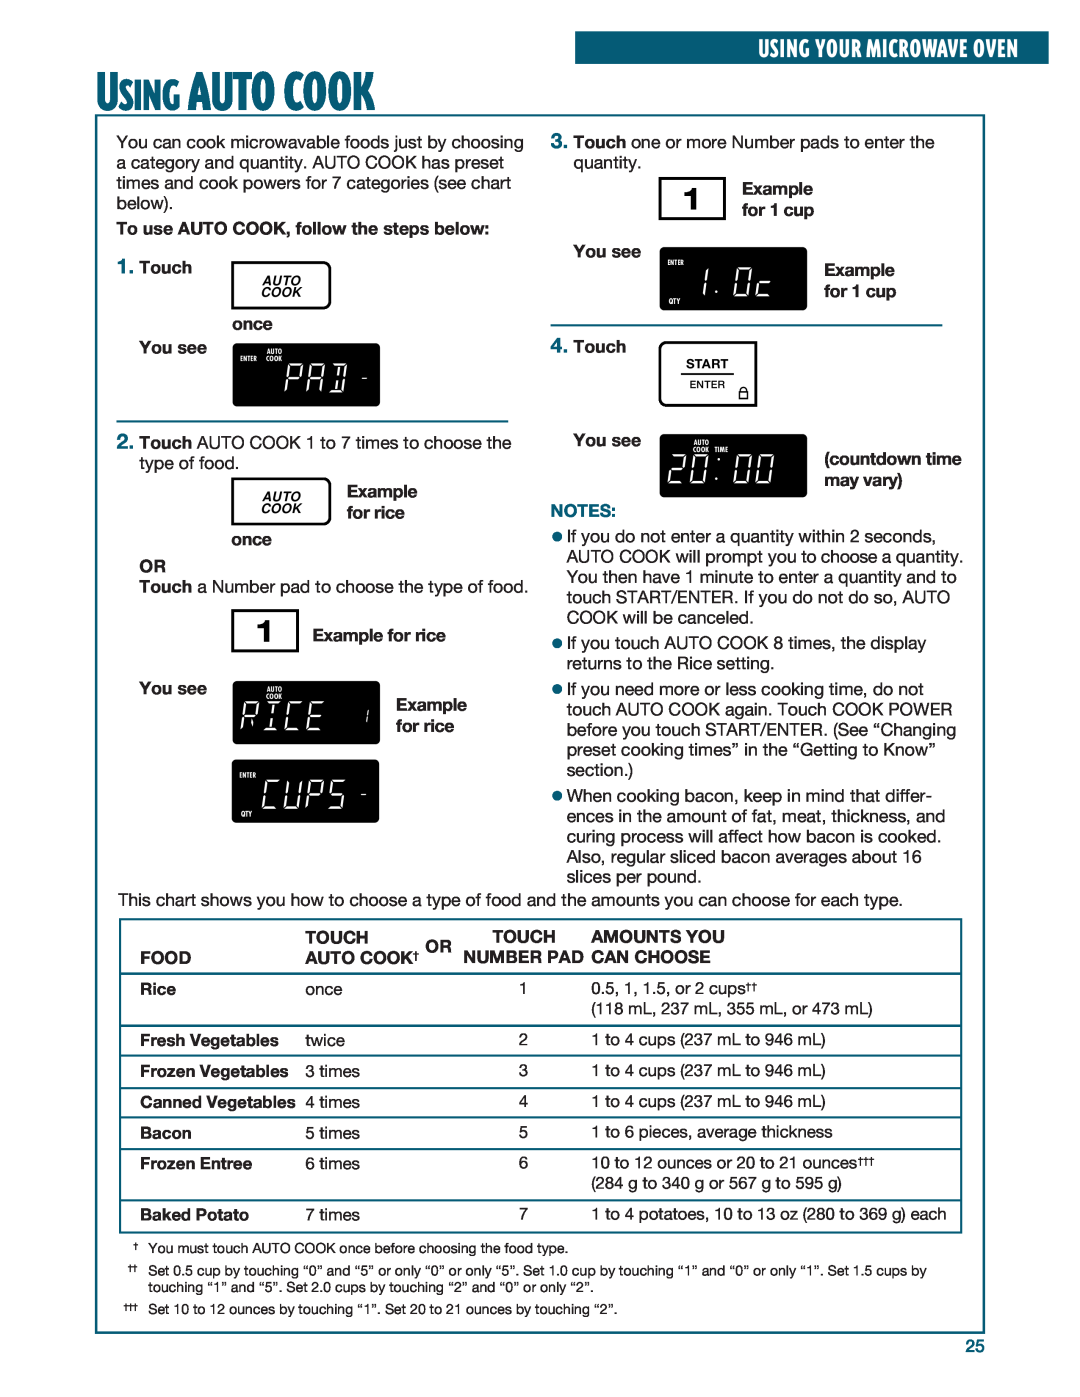 Whirlpool YMH6140XF installation instructions Using Auto Cook, for rice, once, Using Your Microwave Oven 